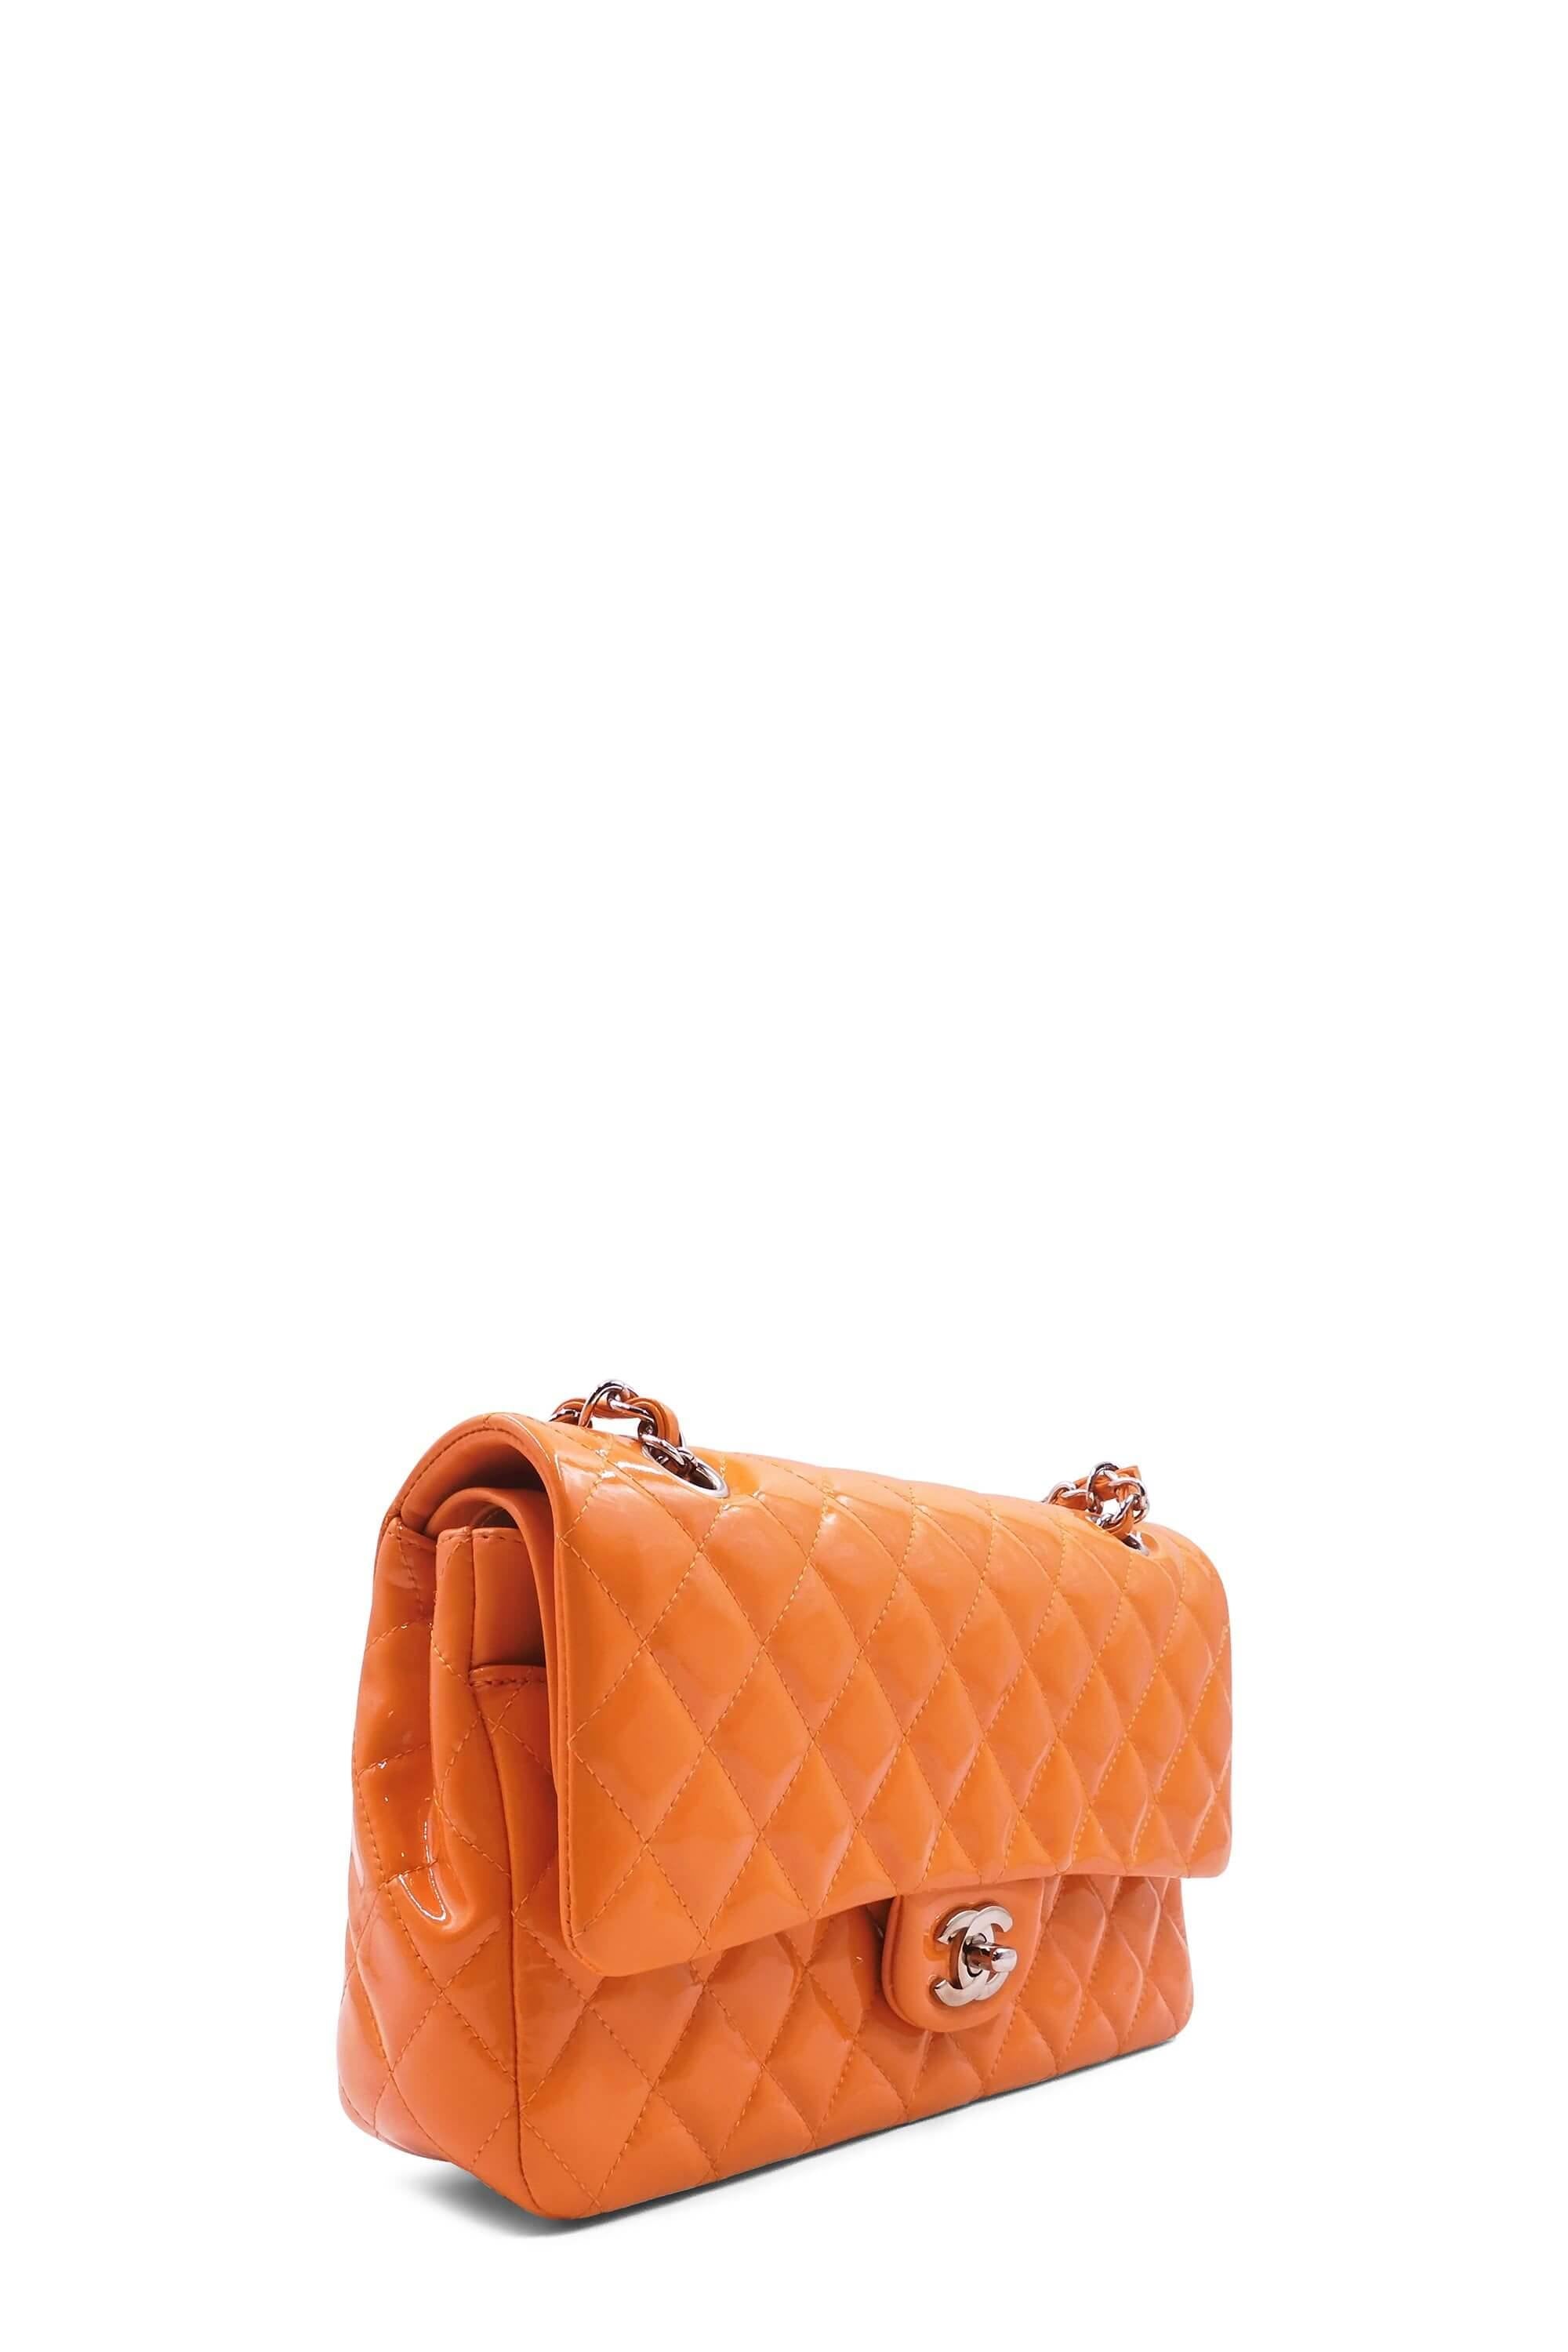 Quilted Patent Medium Classic Flap Bag Orange with Silver Hardware